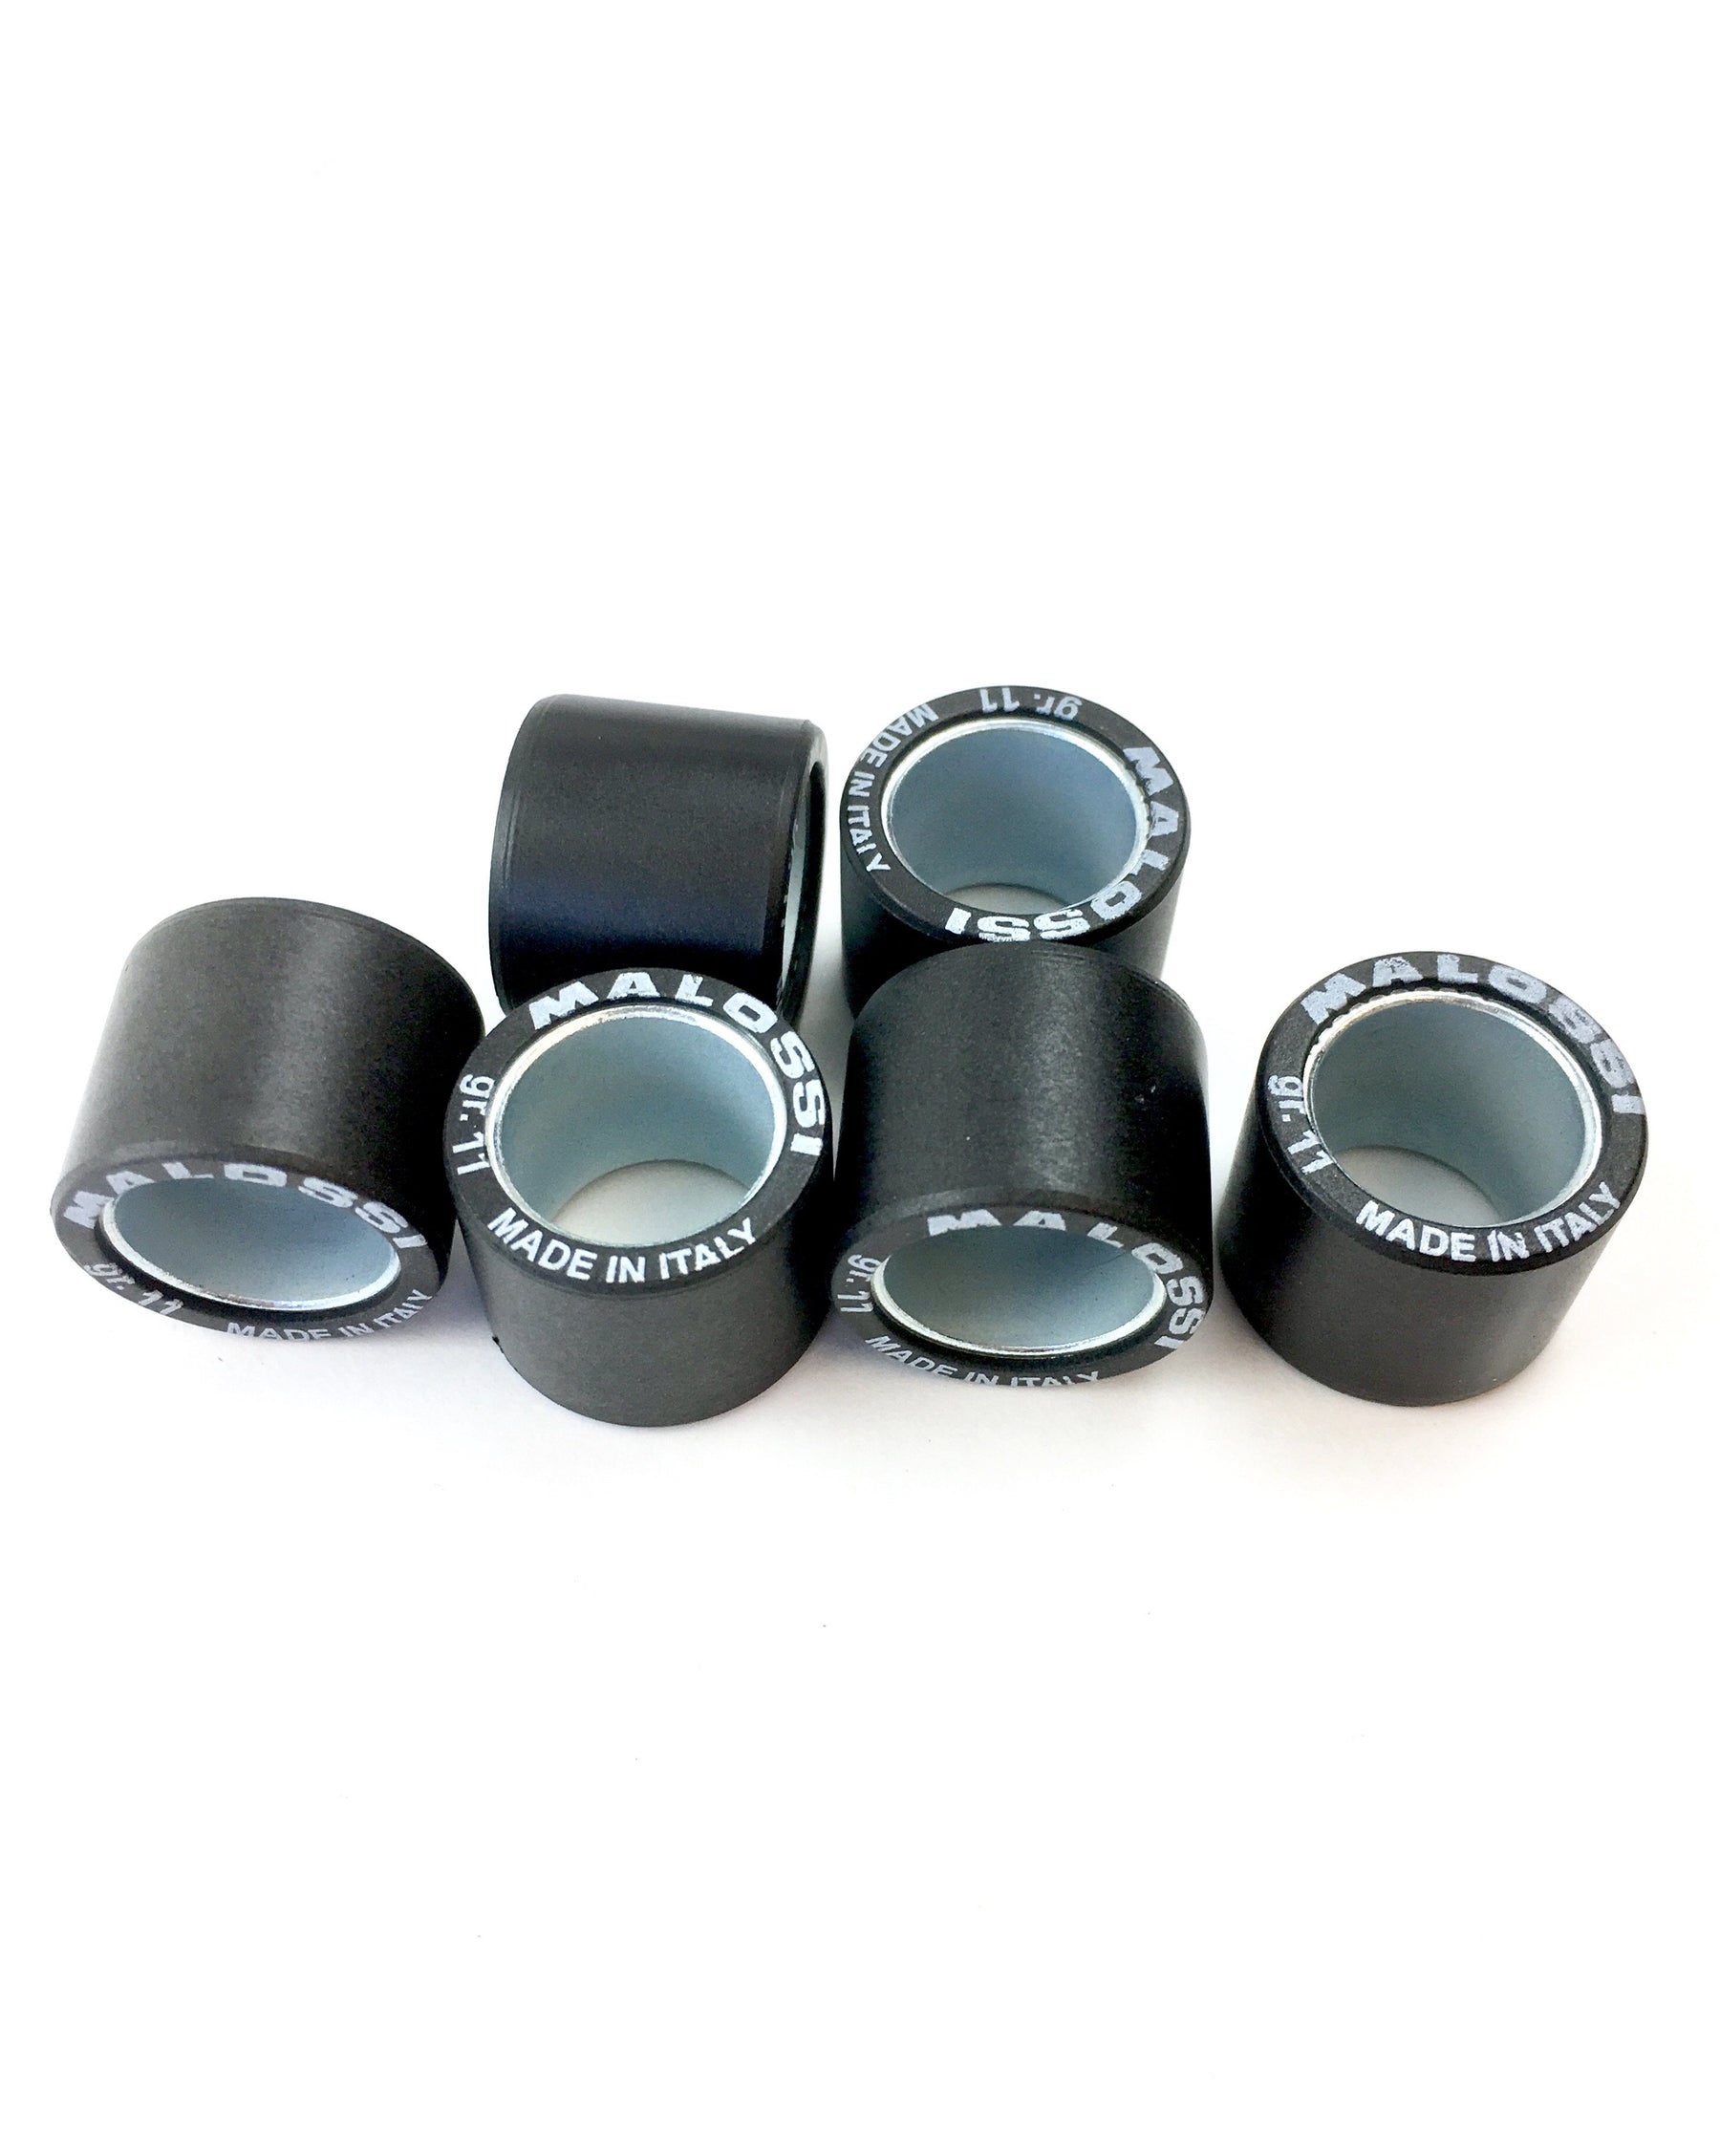 Variator Roller Weights 19mm x 15.5mm 7.2g Malossi